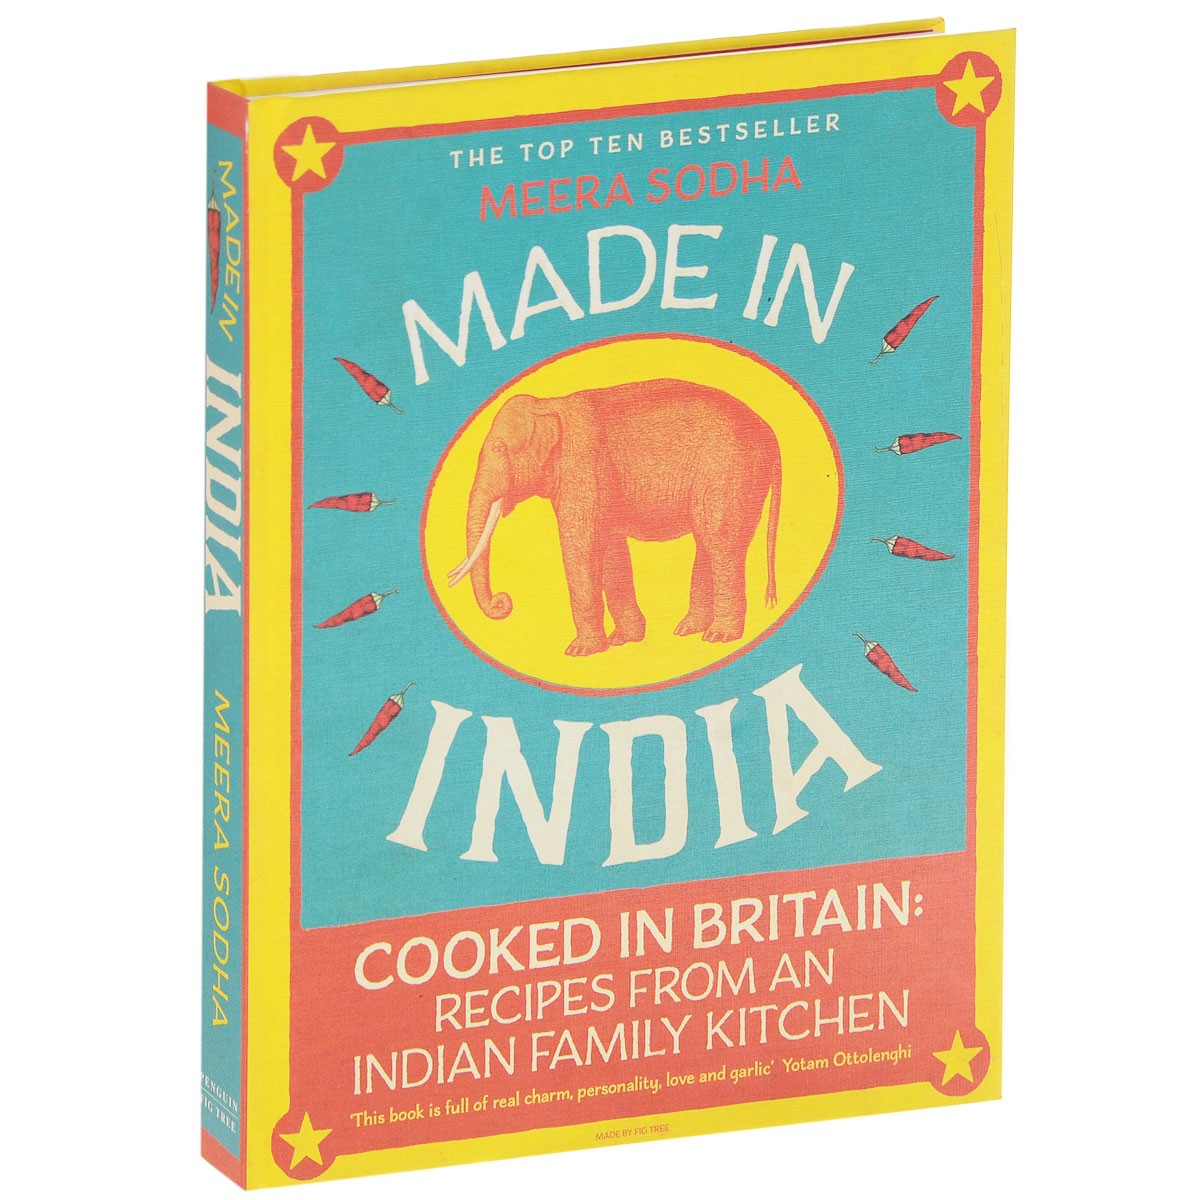 Made in India: Cooked in Britain: Recipes from an Indian Family Kitchen